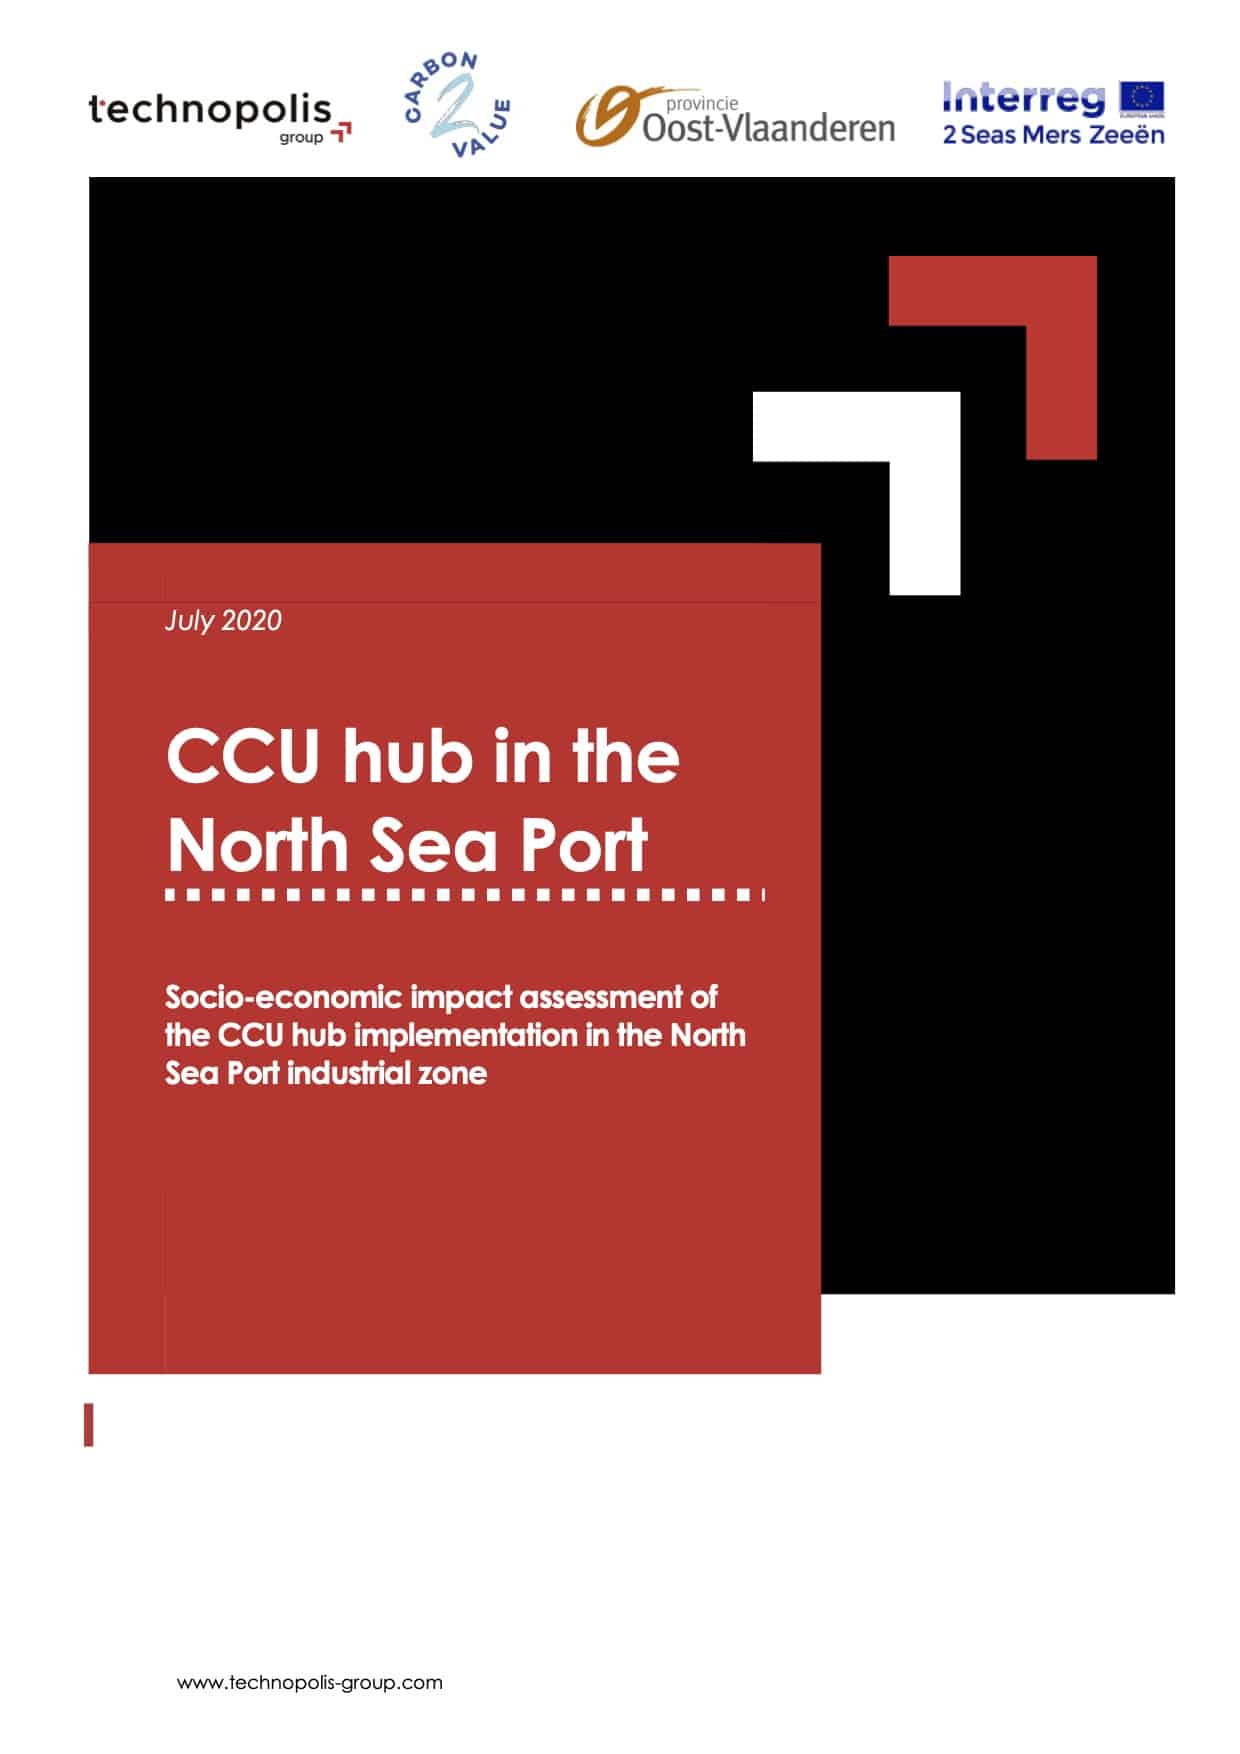 Socio-economic impact assessment of the CCU hub implementation in the North Sea Port industrial zone